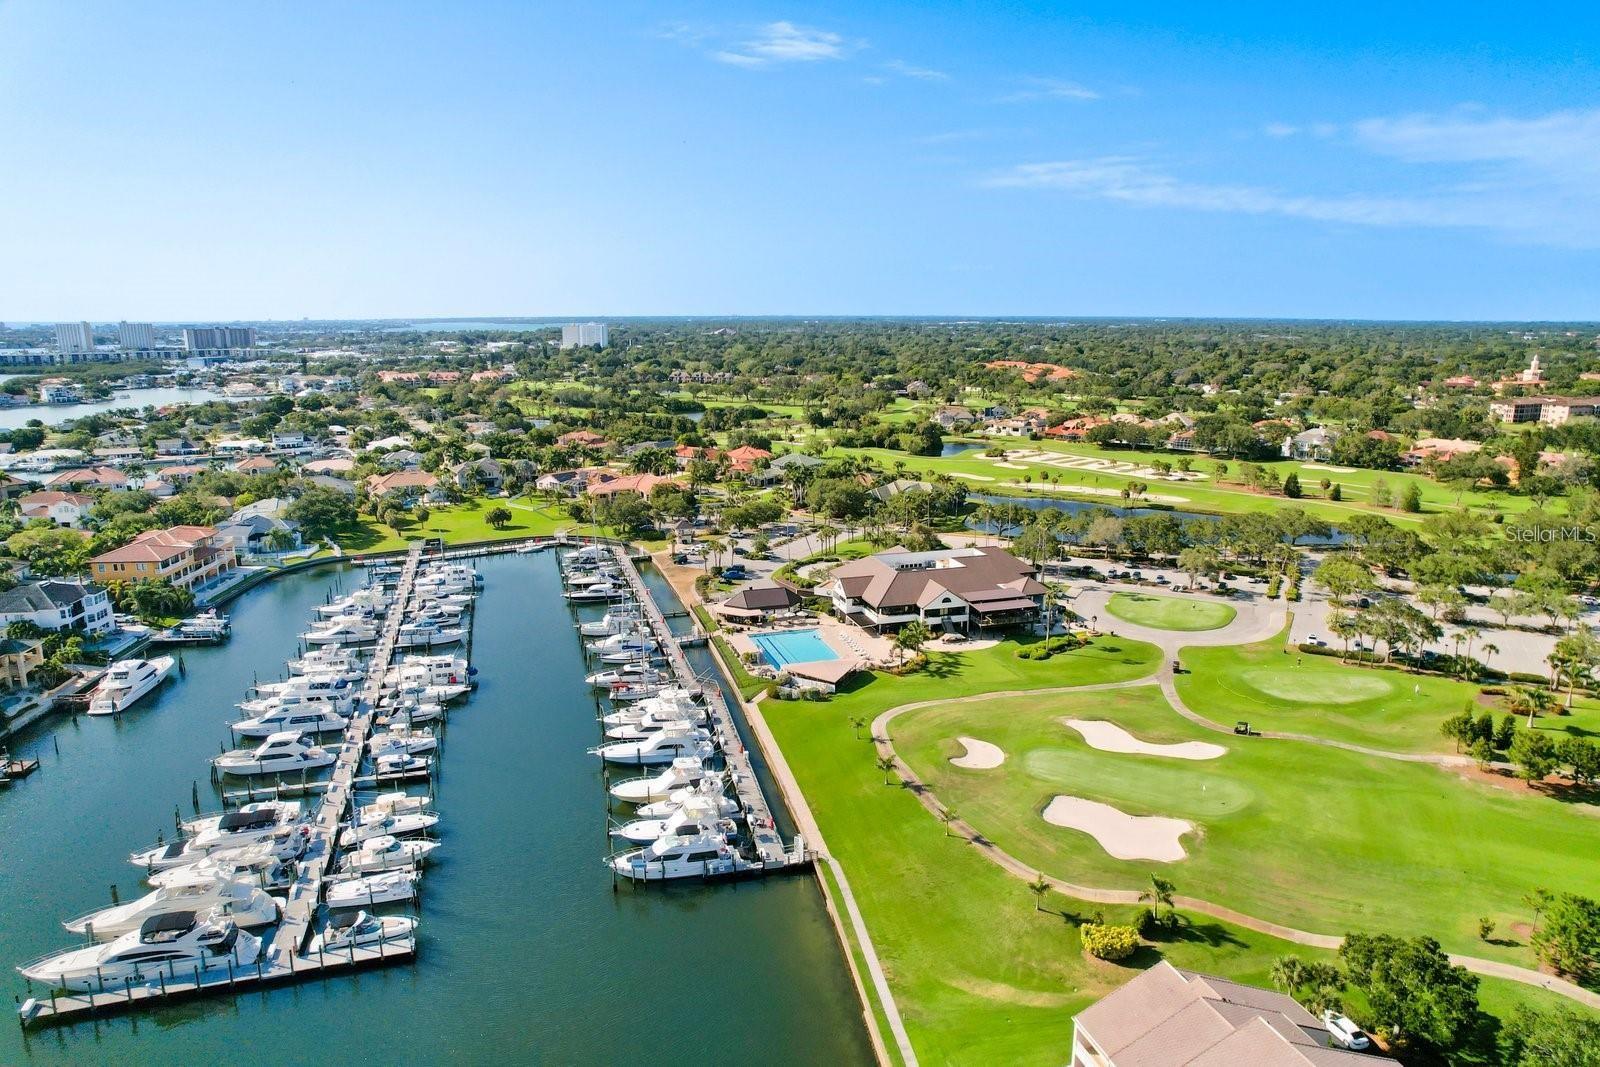 Marina, golf course and clubhouse